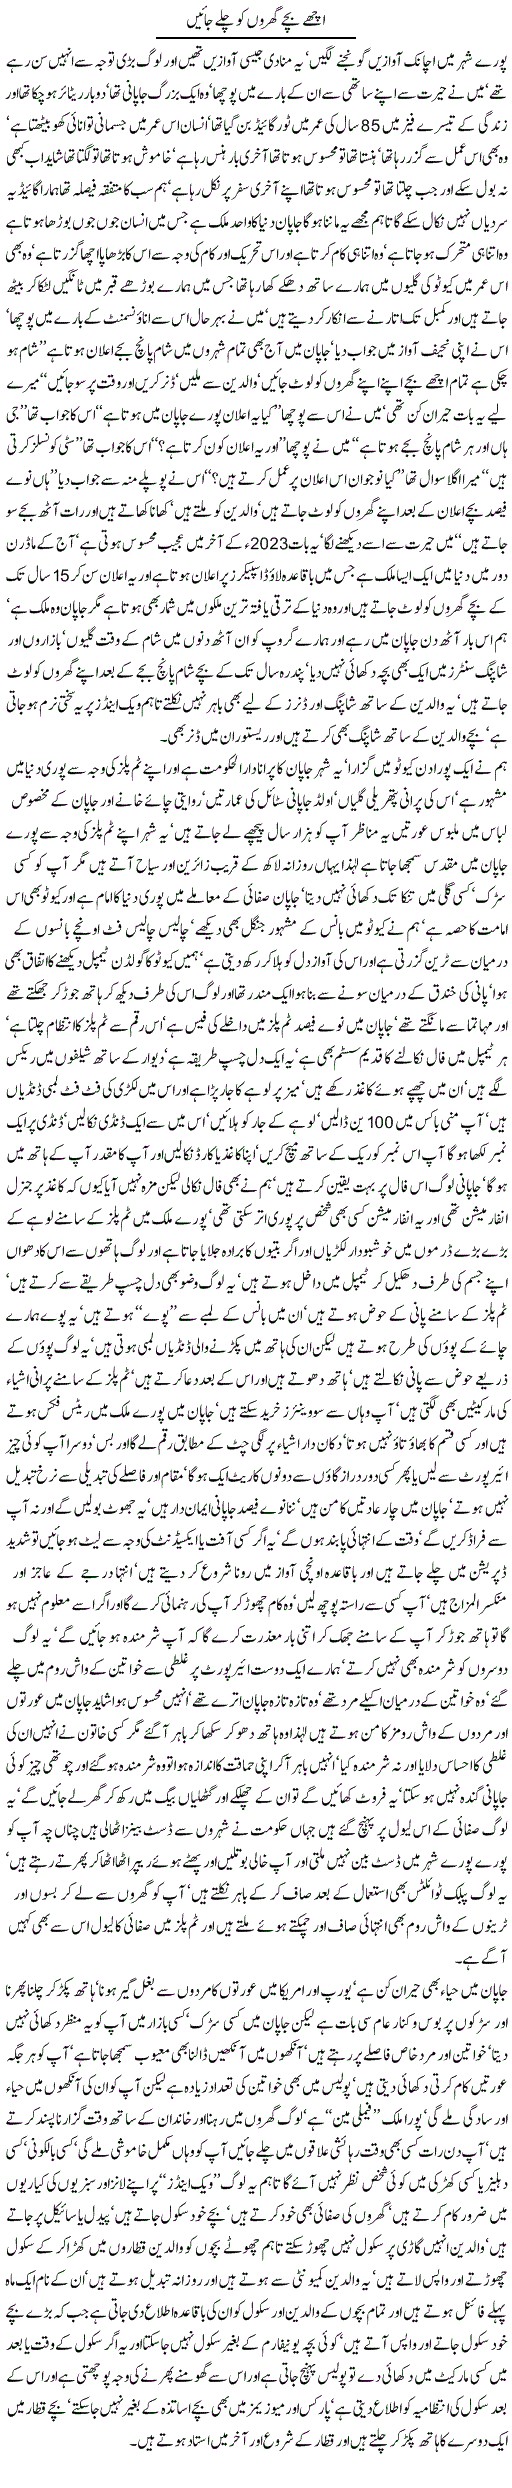 Javed Chaudhry Column About Japan & Its People